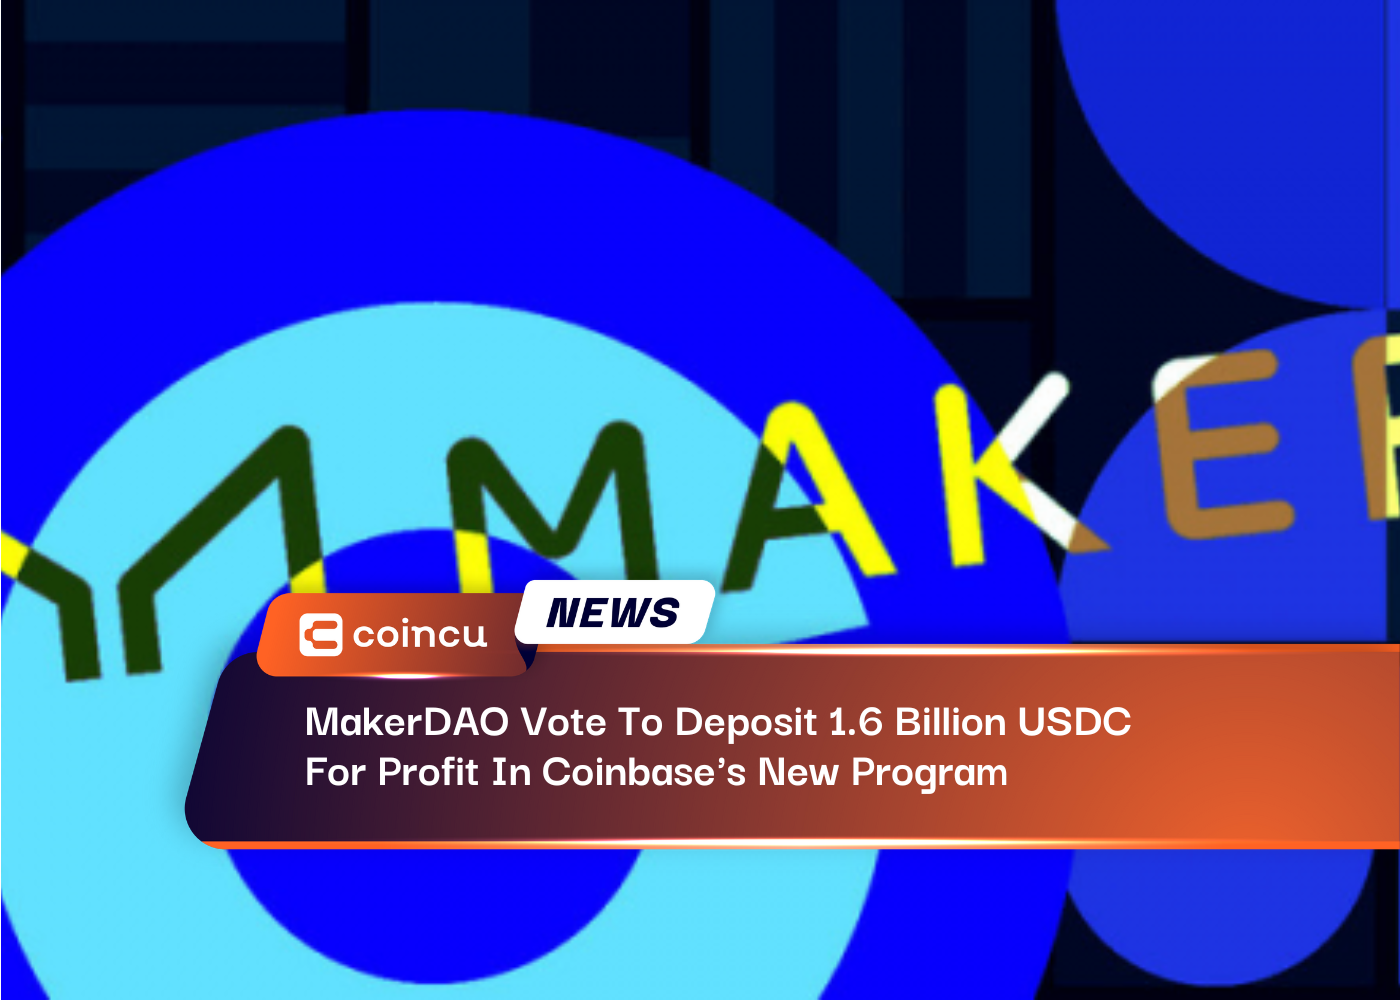 MakerDAO Vote To Deposit 1.6 Billion USDC For Profit In Coinbase's New Program